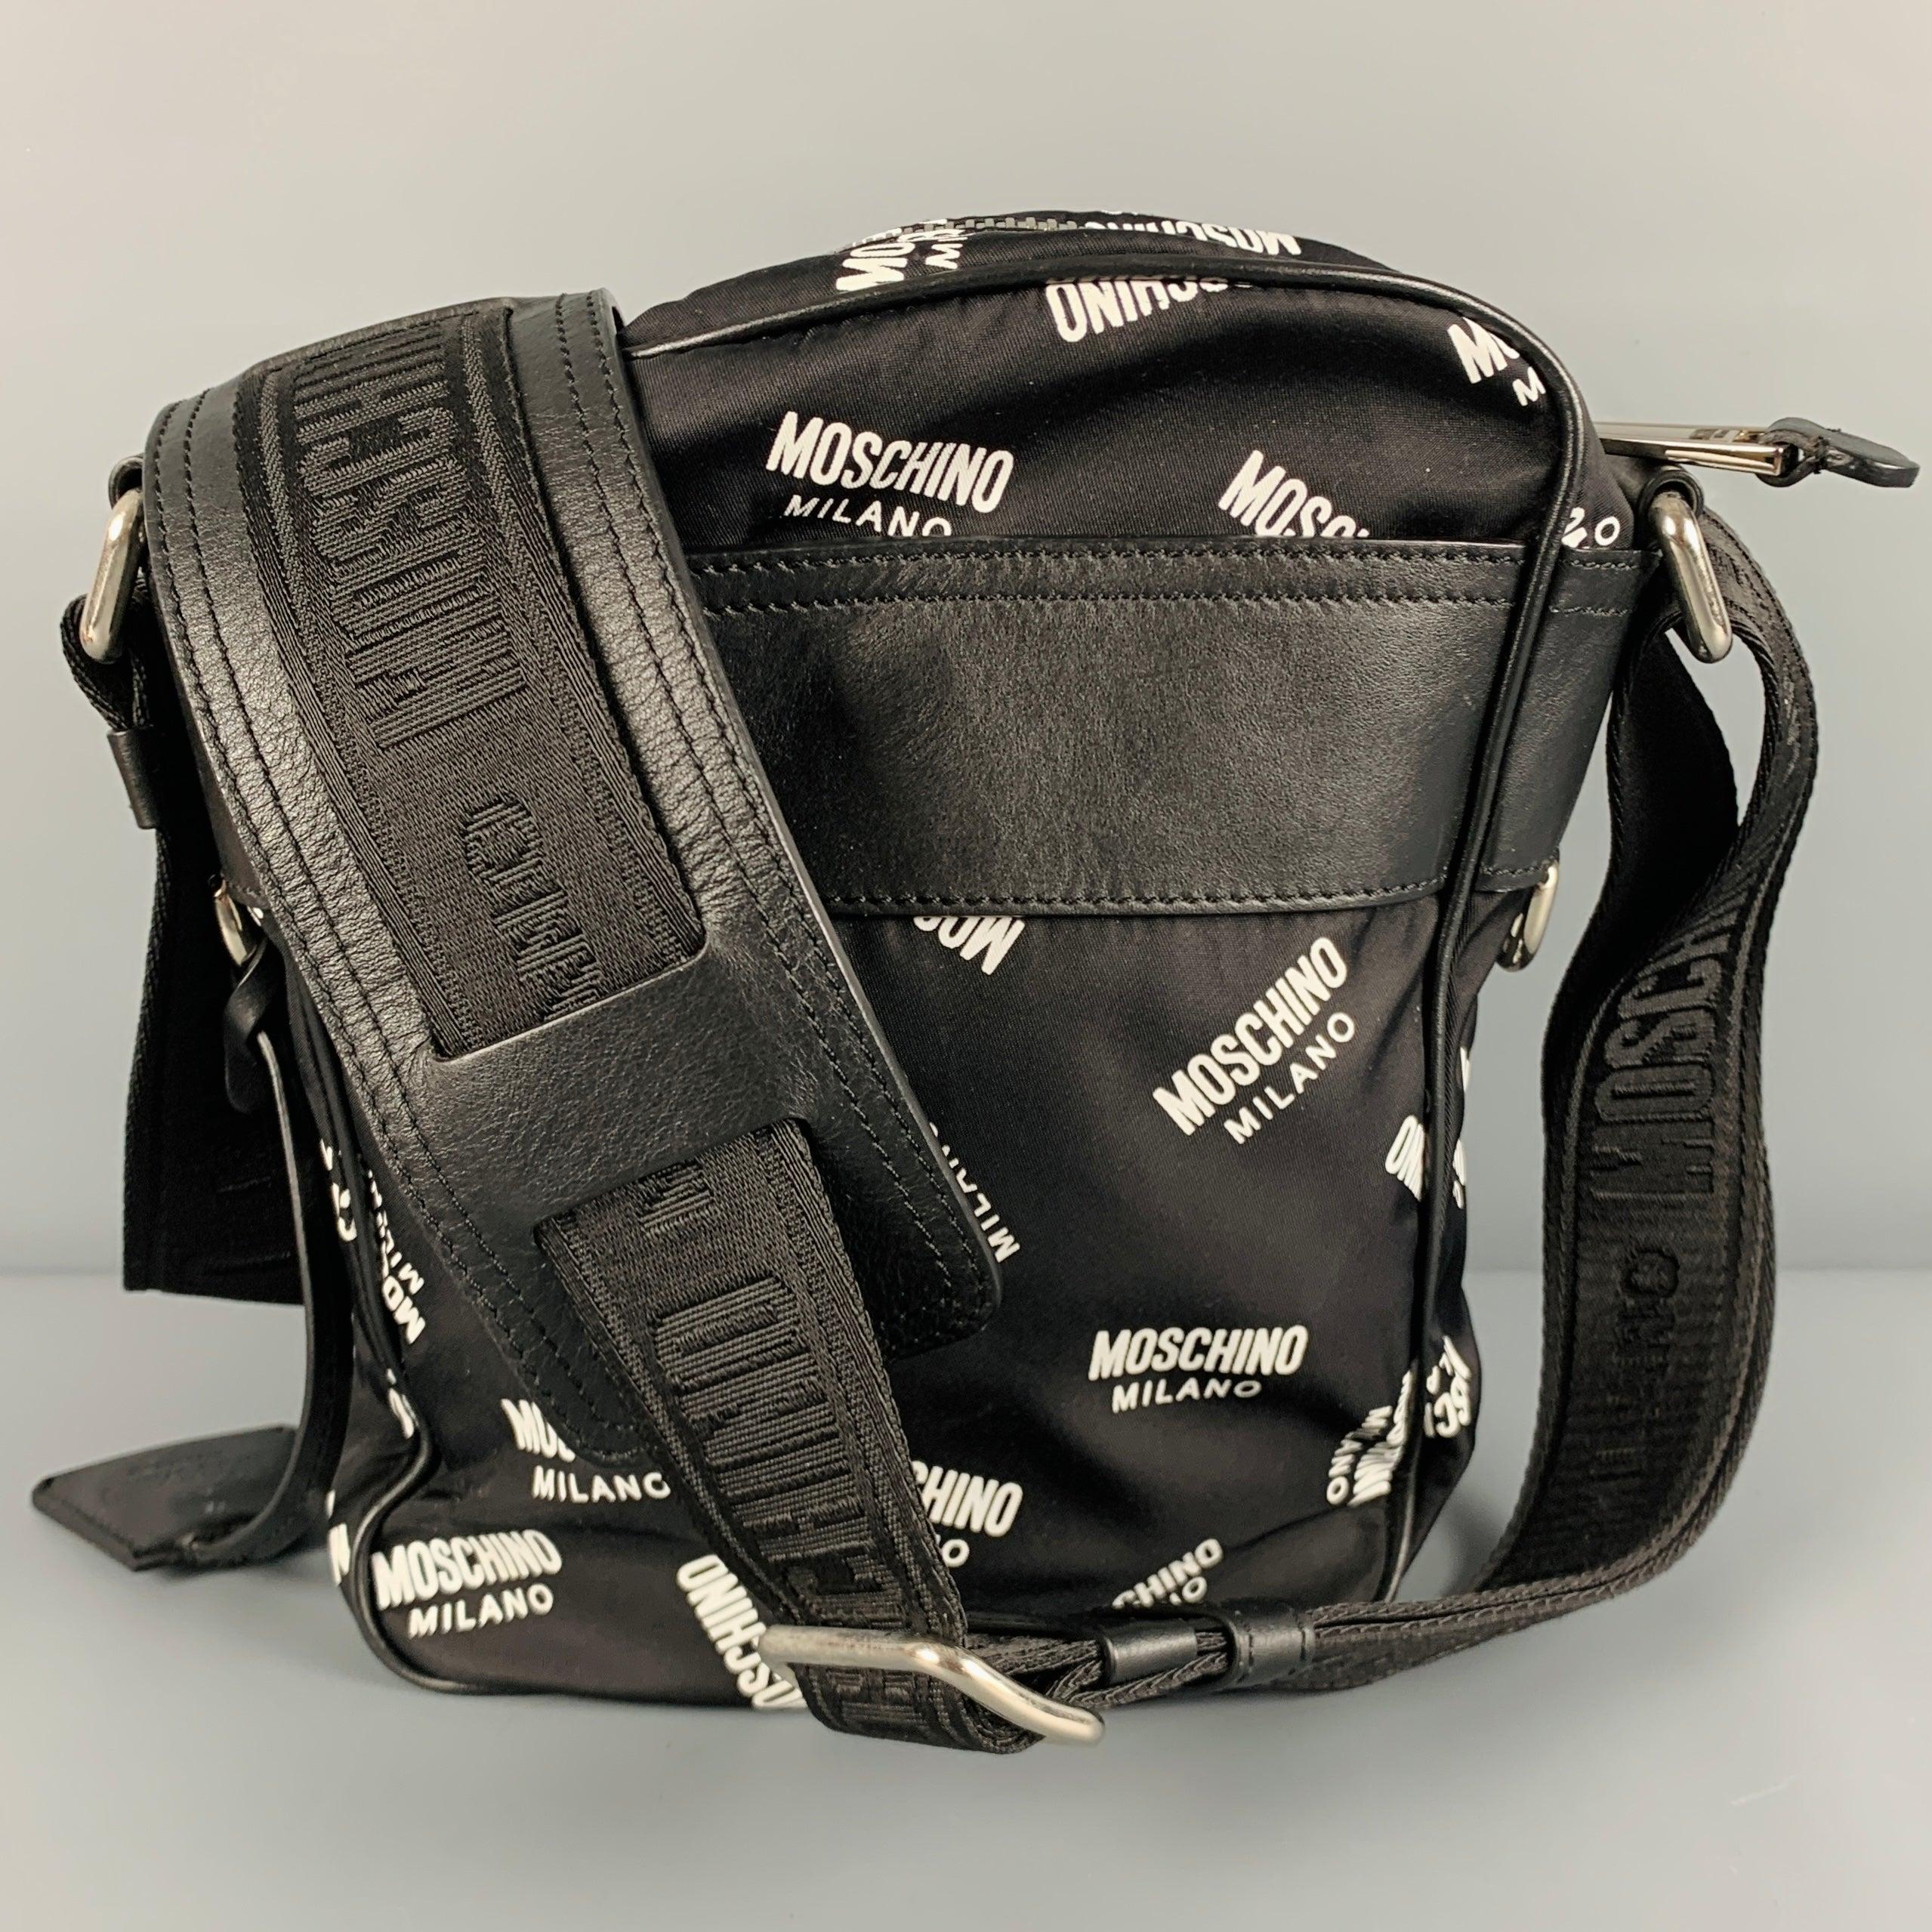 MOSCHINO Black White Logo Nylon Cross Body Bag In Excellent Condition For Sale In San Francisco, CA